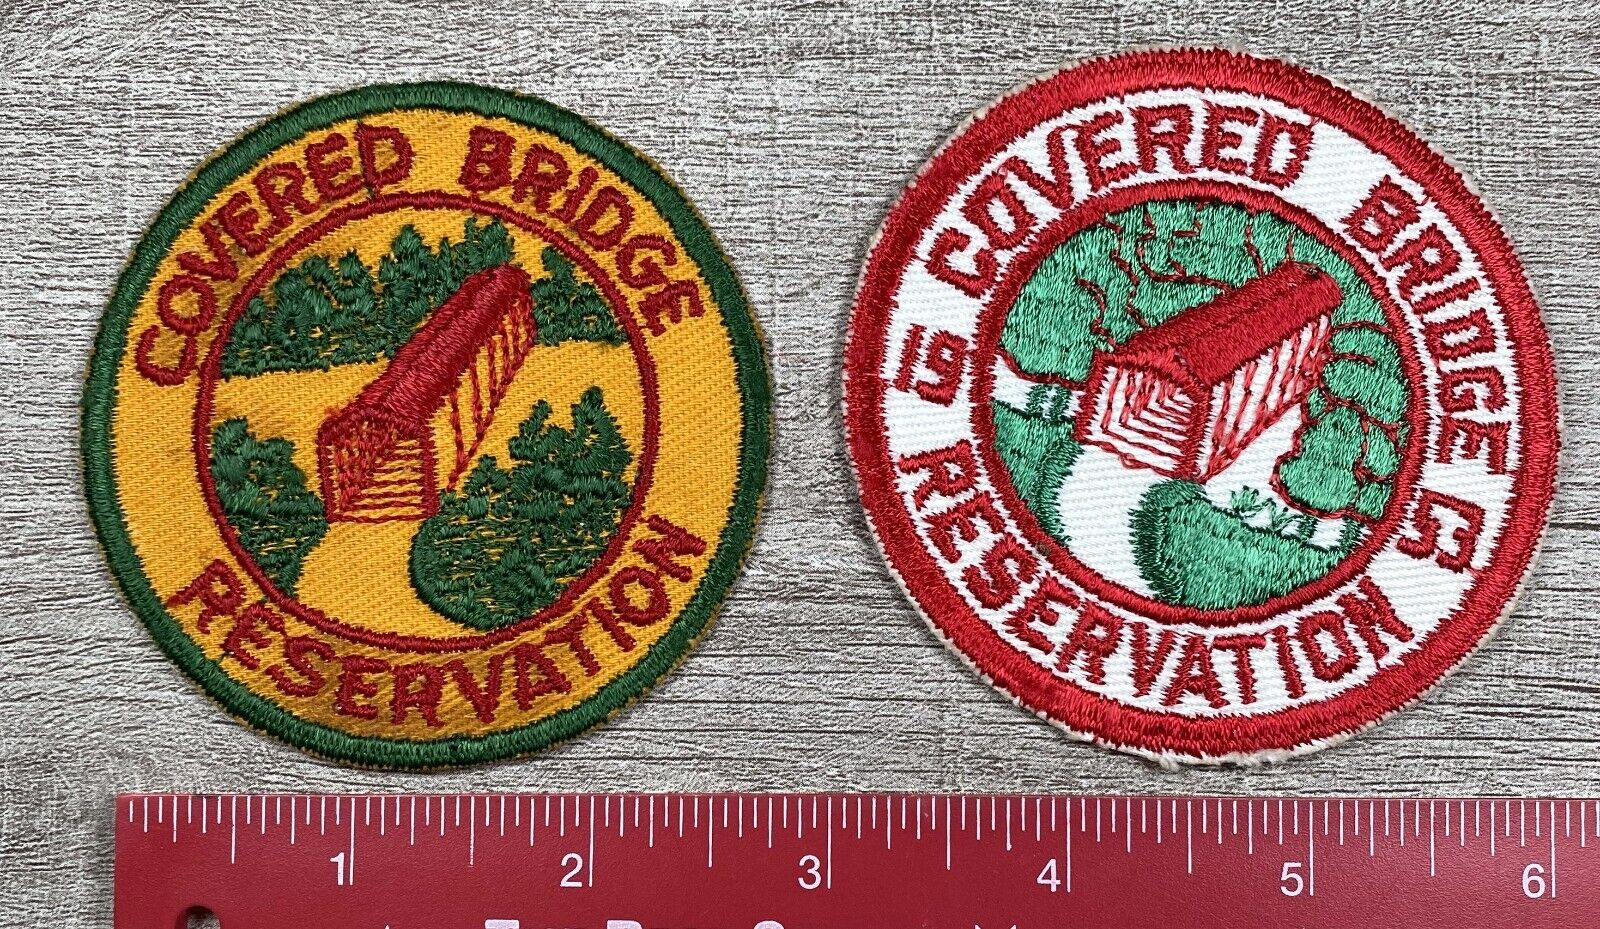 Two Covered Bridge Reservation Patches